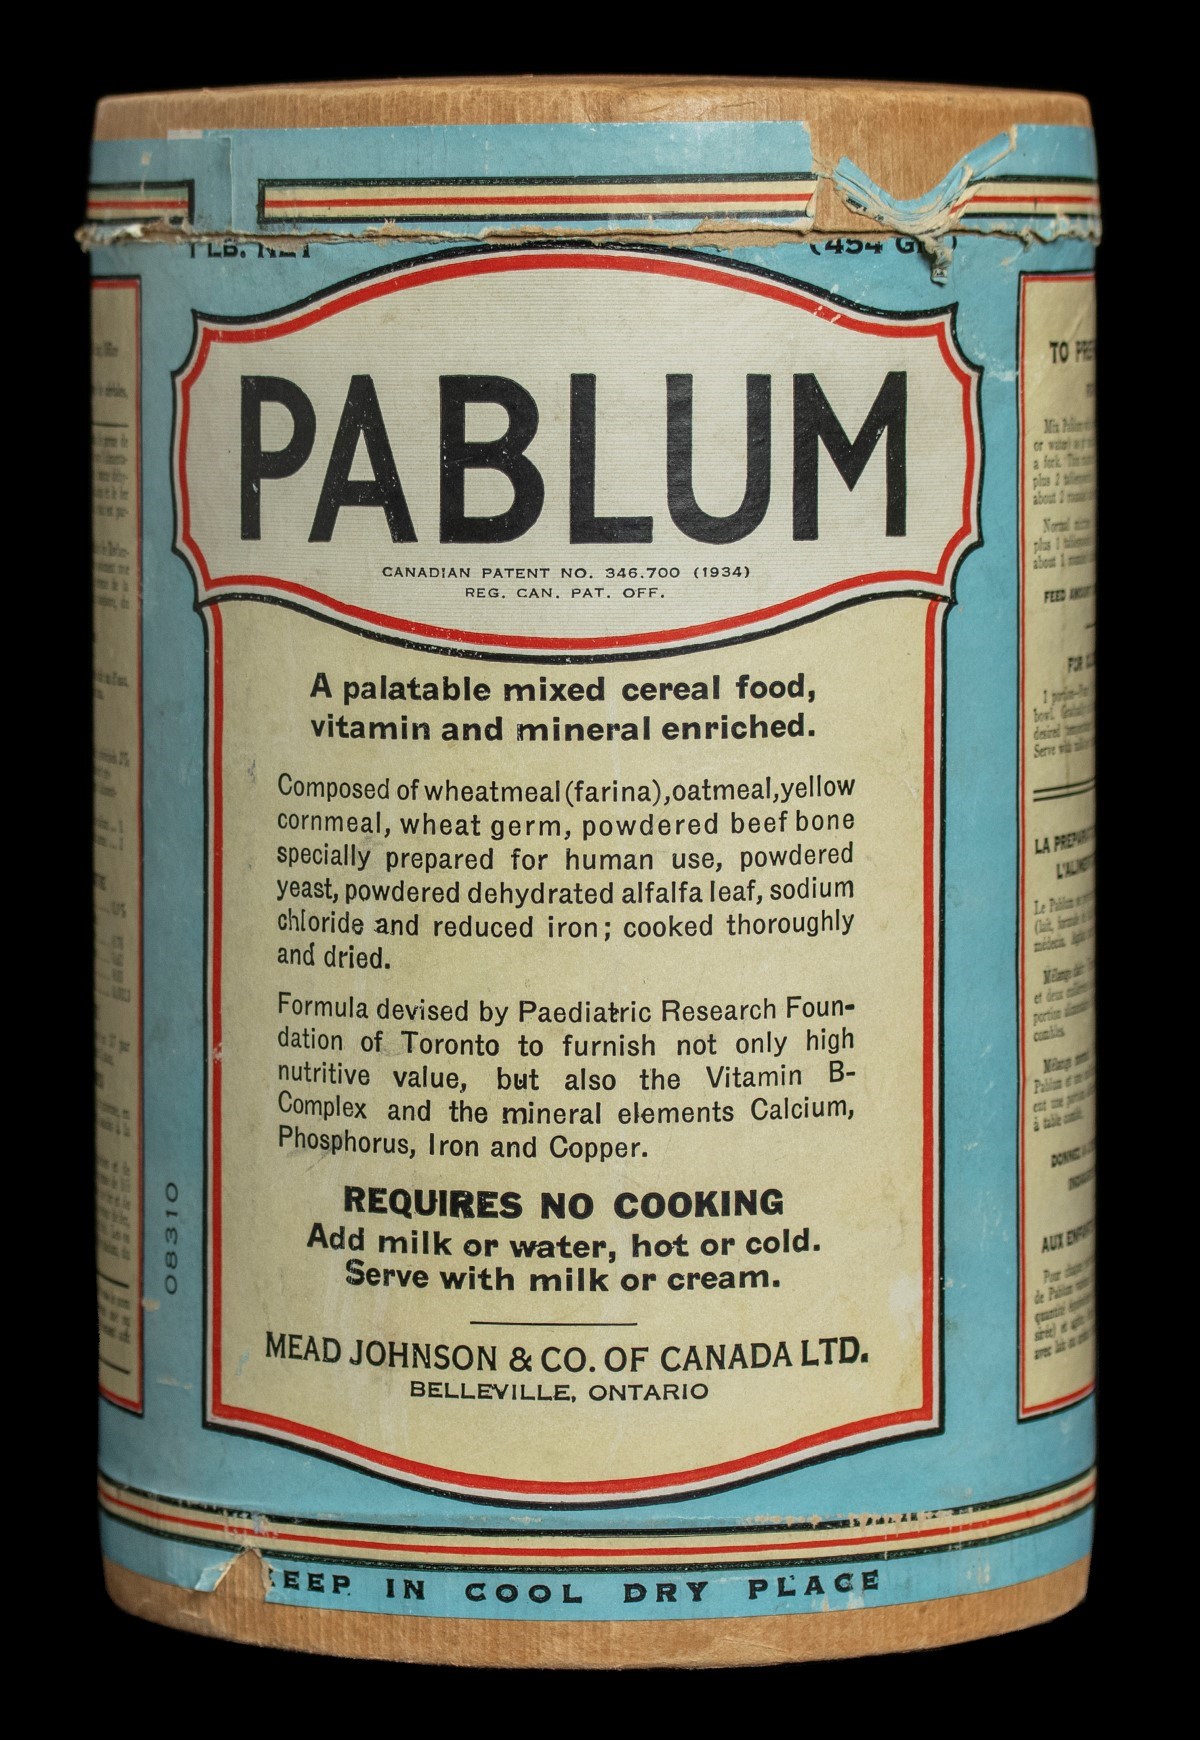 Close-up of Pablum can label. The main text reads, "A palatable mixed cereal food, vitamin and mineral enriched" and "Requires no cooking. Add milk or water, hot or cold. Serve with milk or cream".